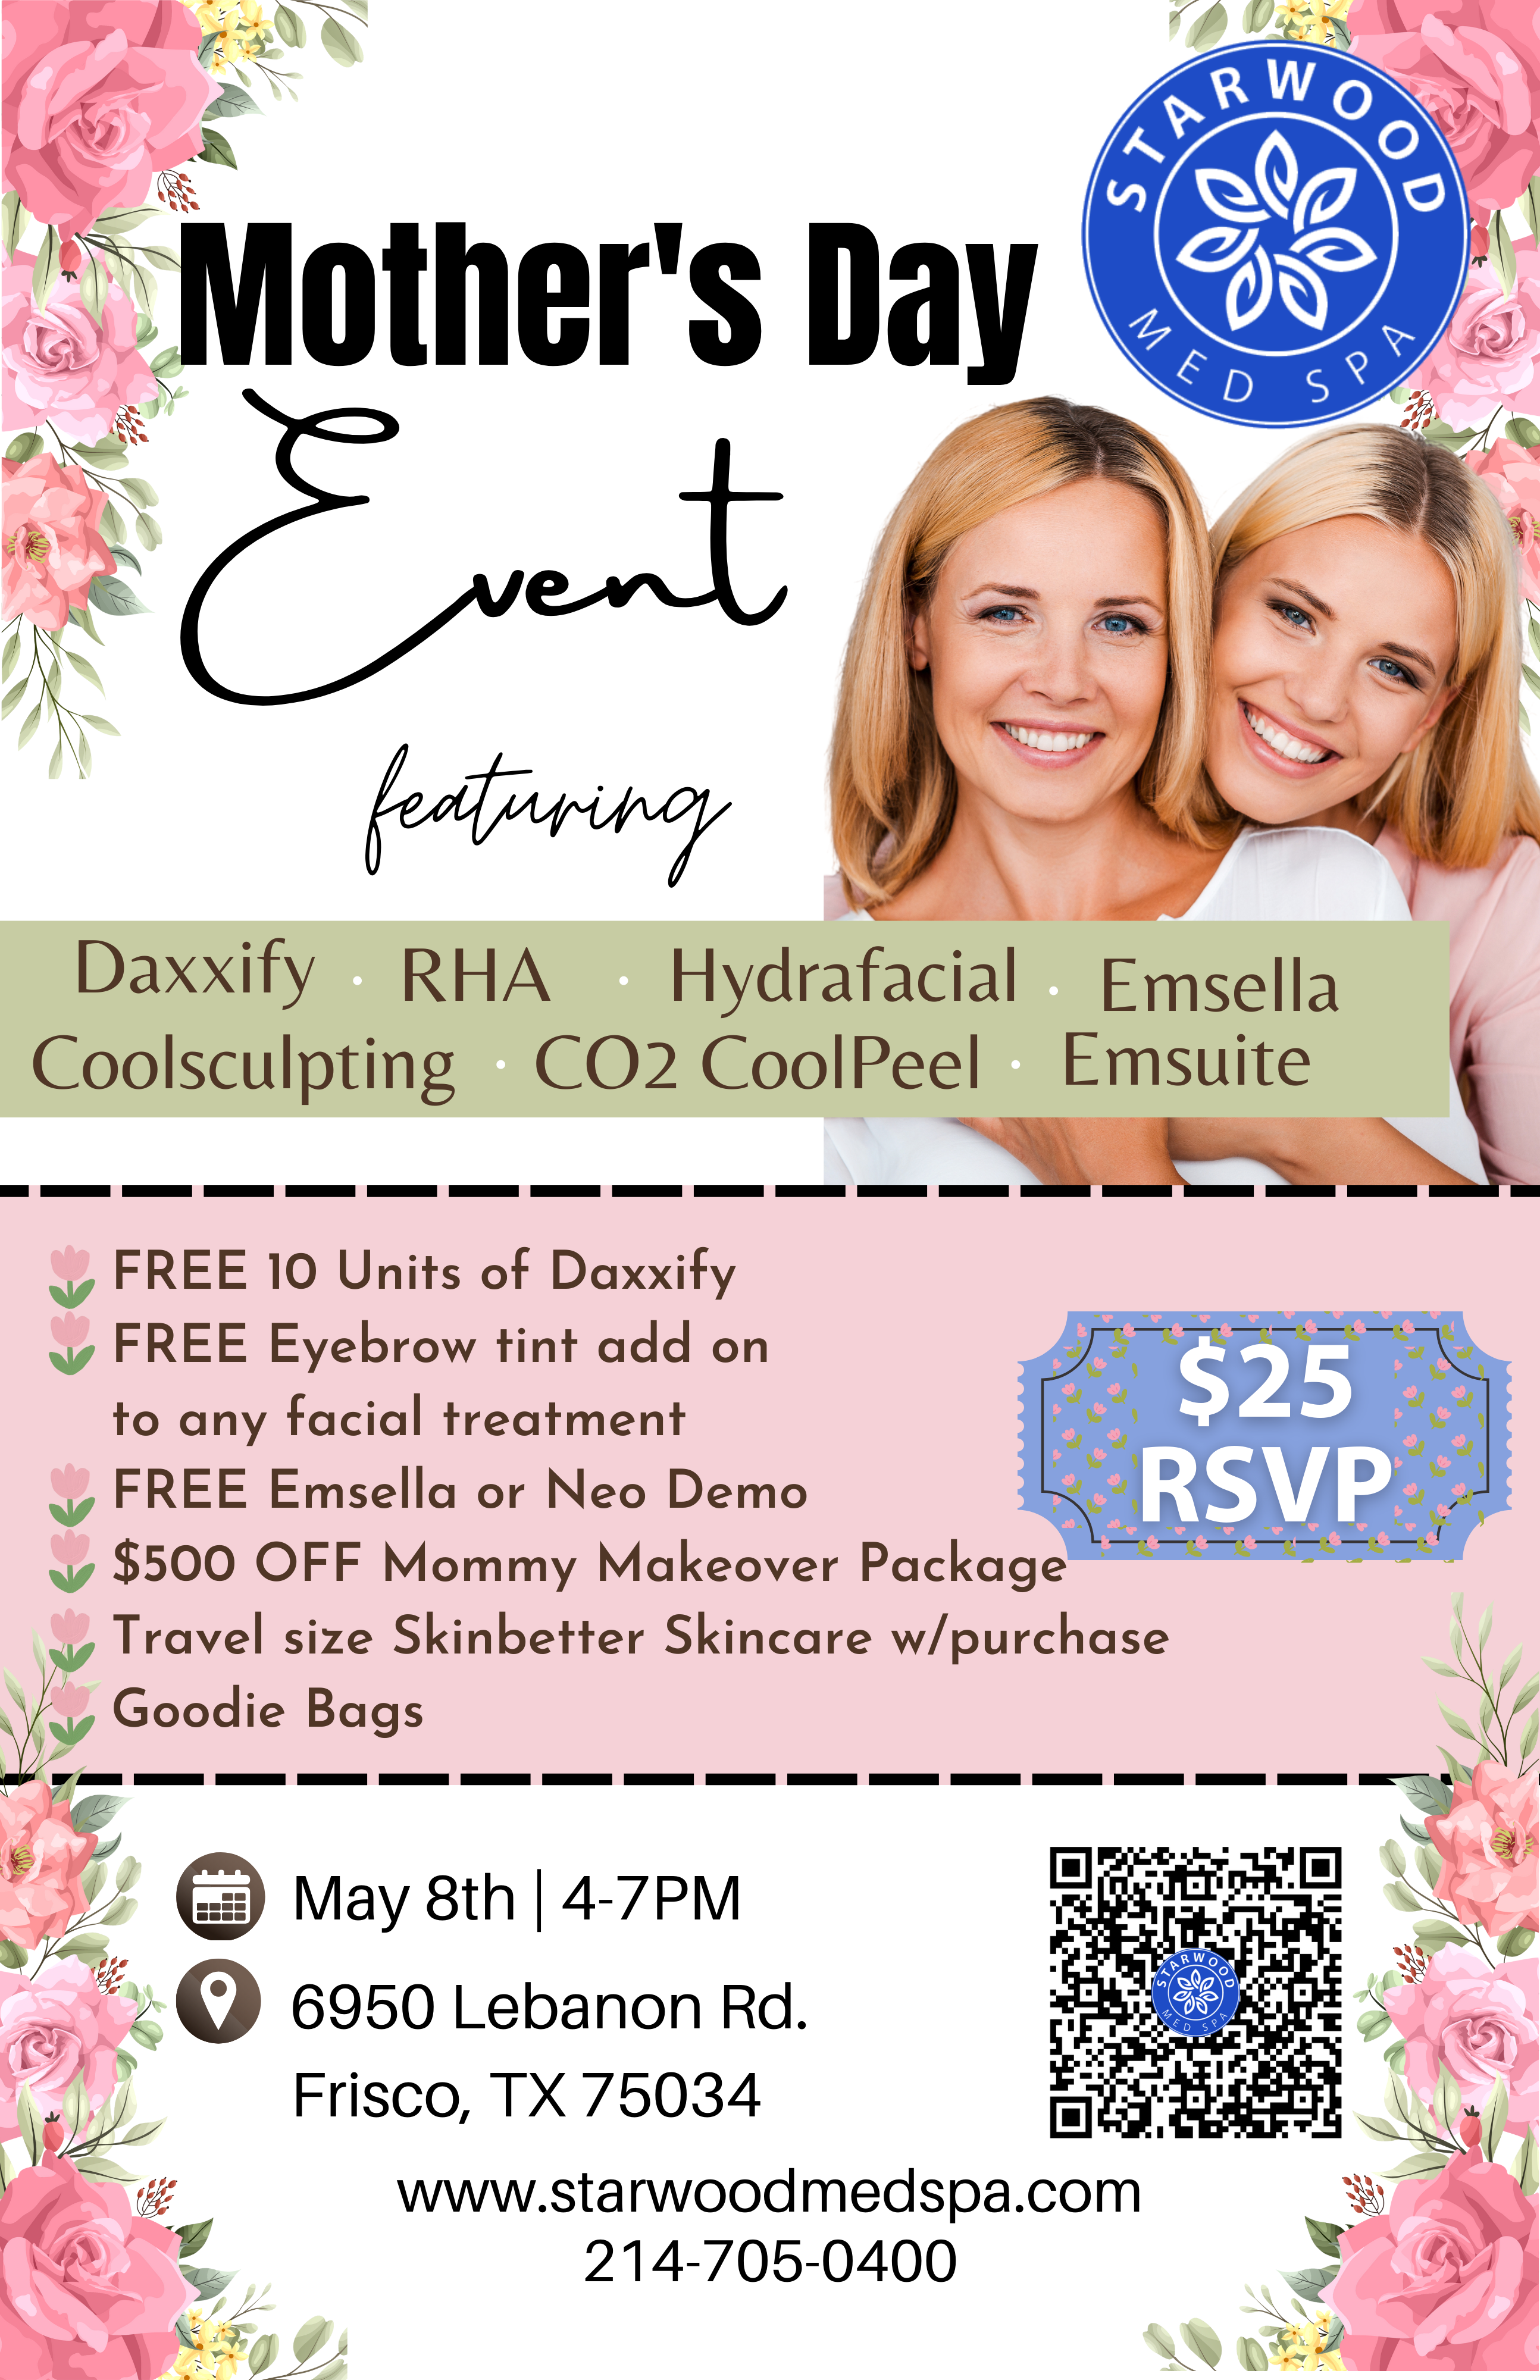 Mother's Day Event RSVP